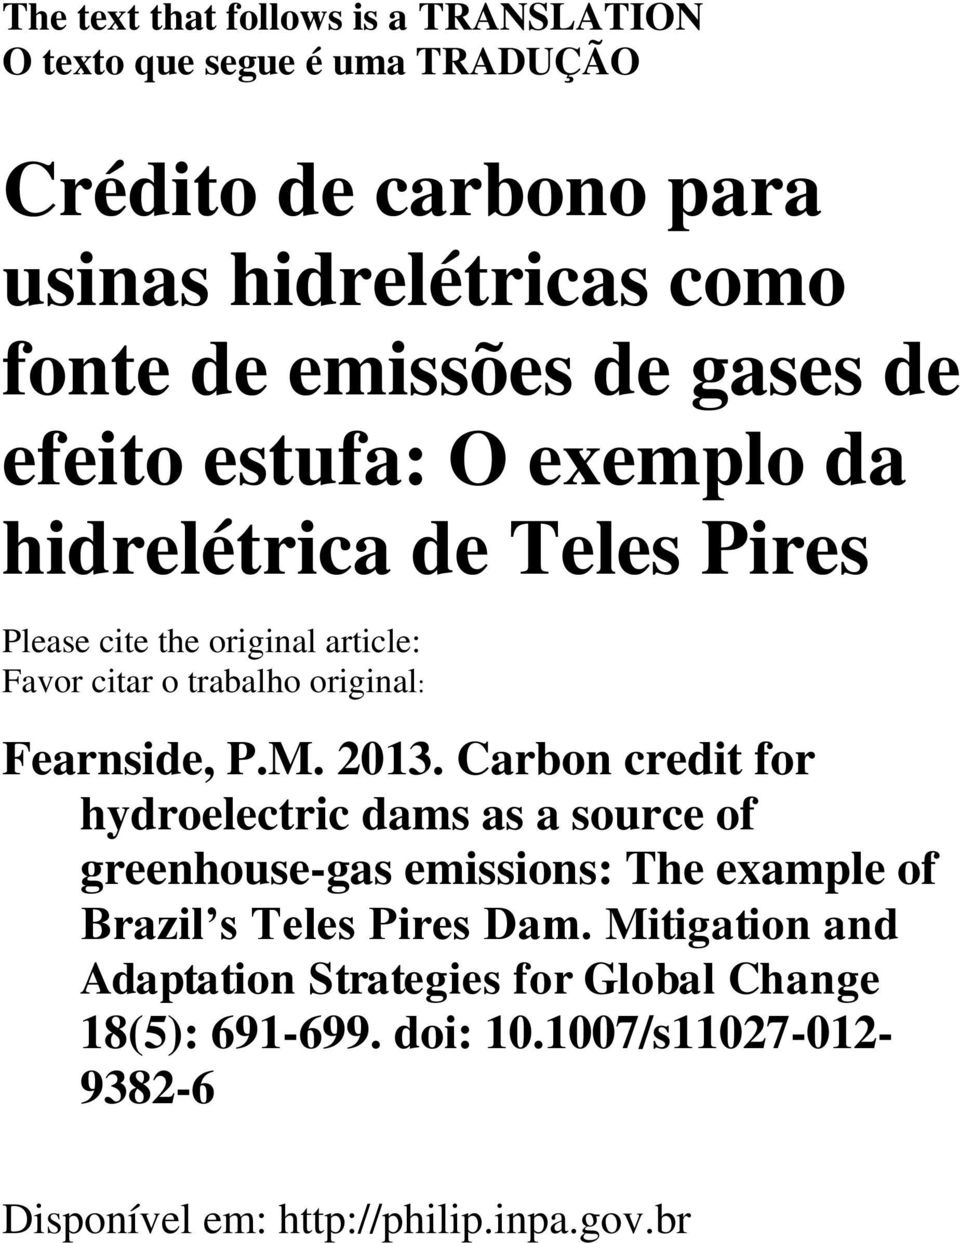 Fearnside, P.M. 2013. Carbon credit for hydroelectric dams as a source of greenhouse-gas emissions: The example of Brazil s Teles Pires Dam.